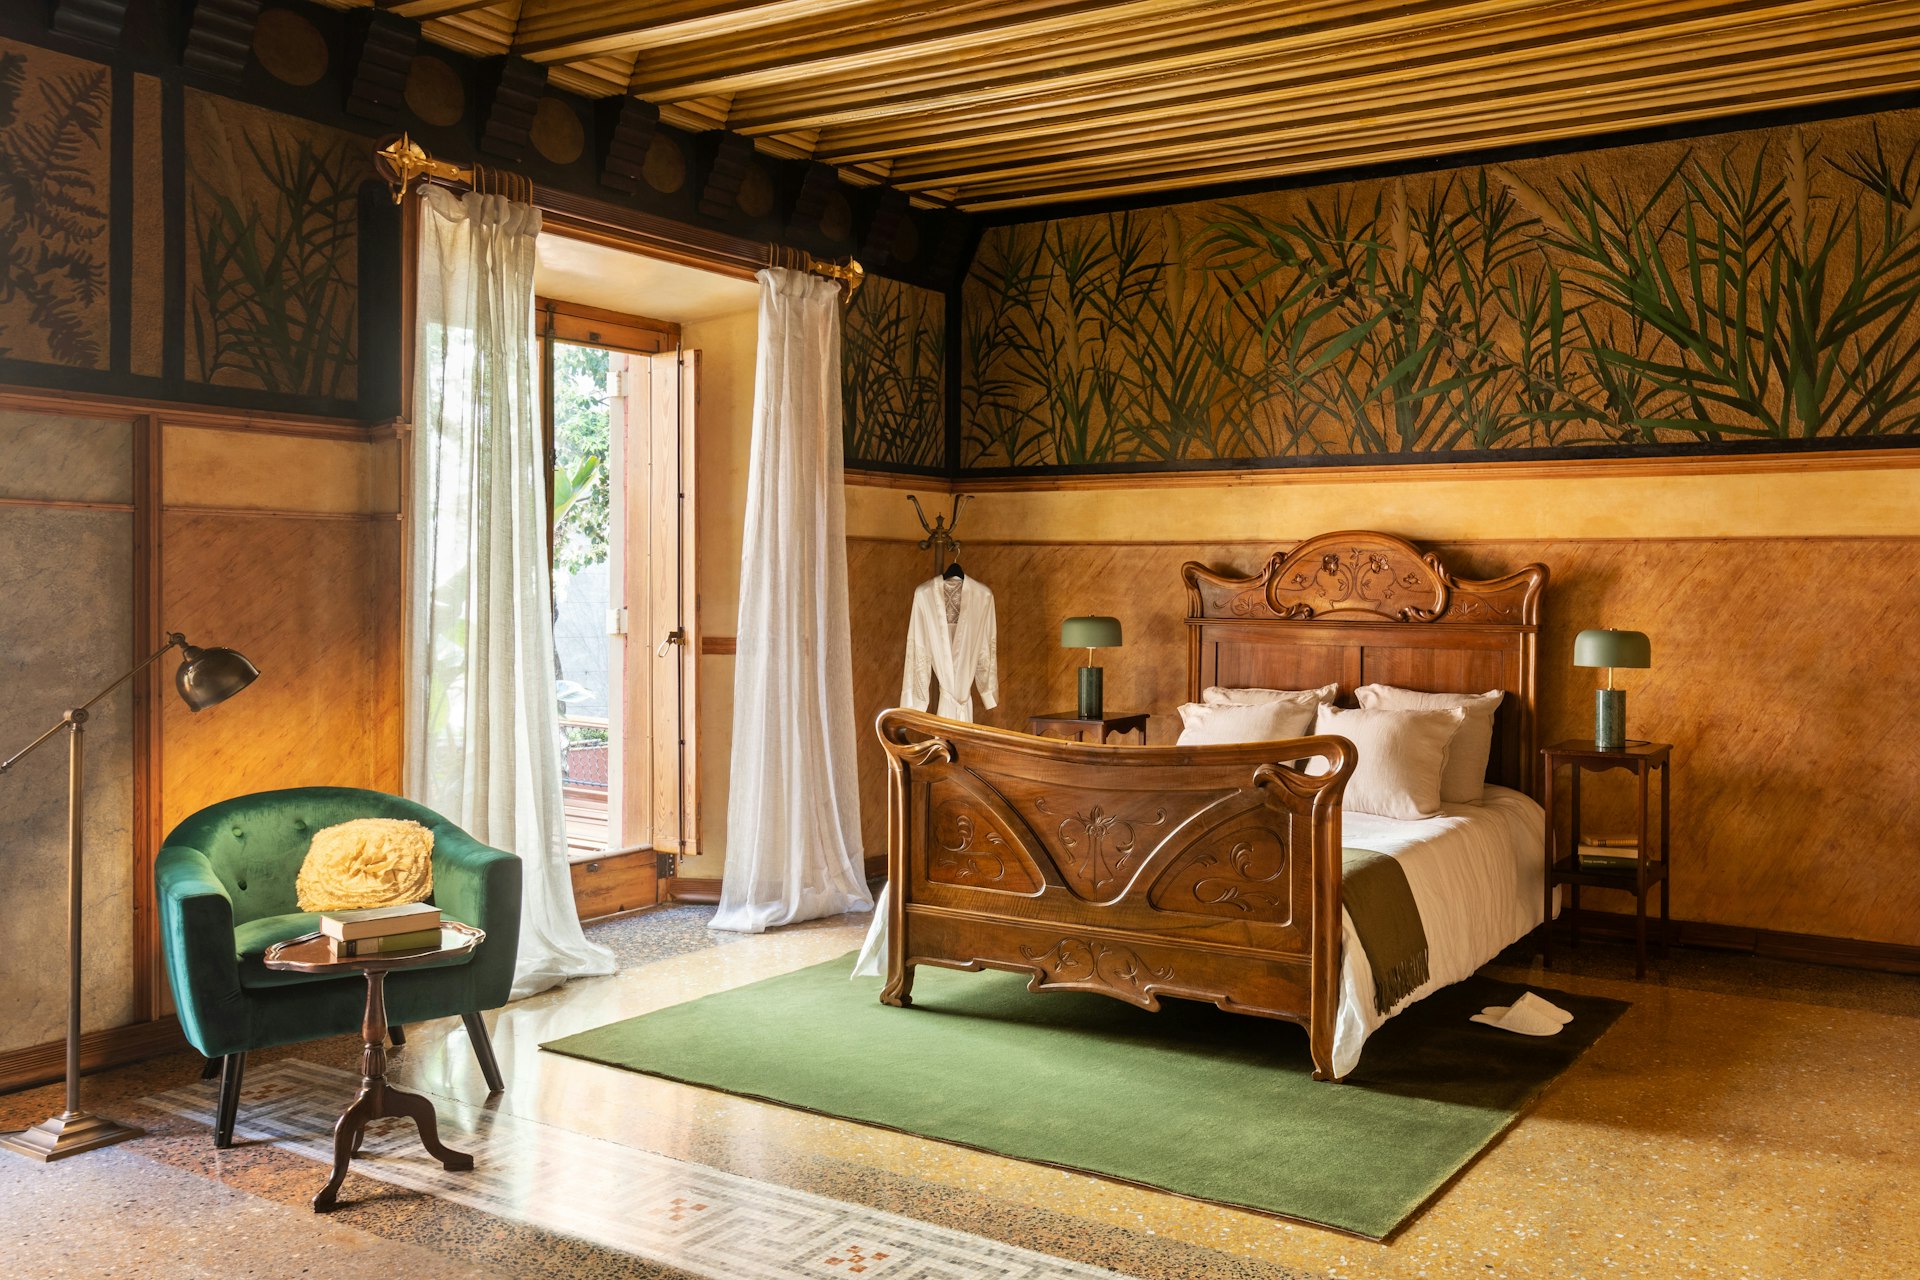 The bedroom of Casa Vicens